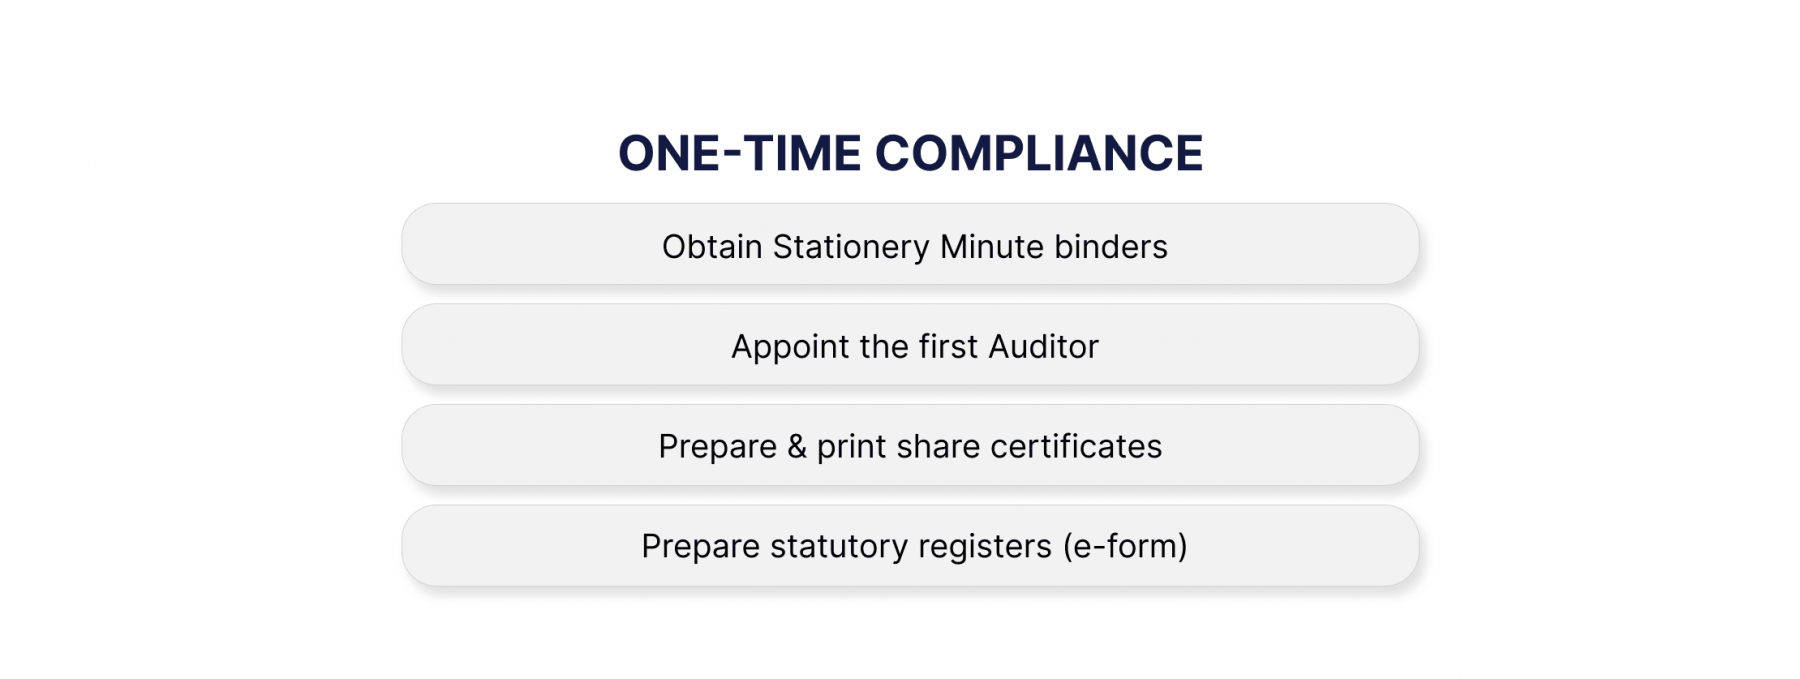 Private Limited Company's One-time Compliance for Annual Process